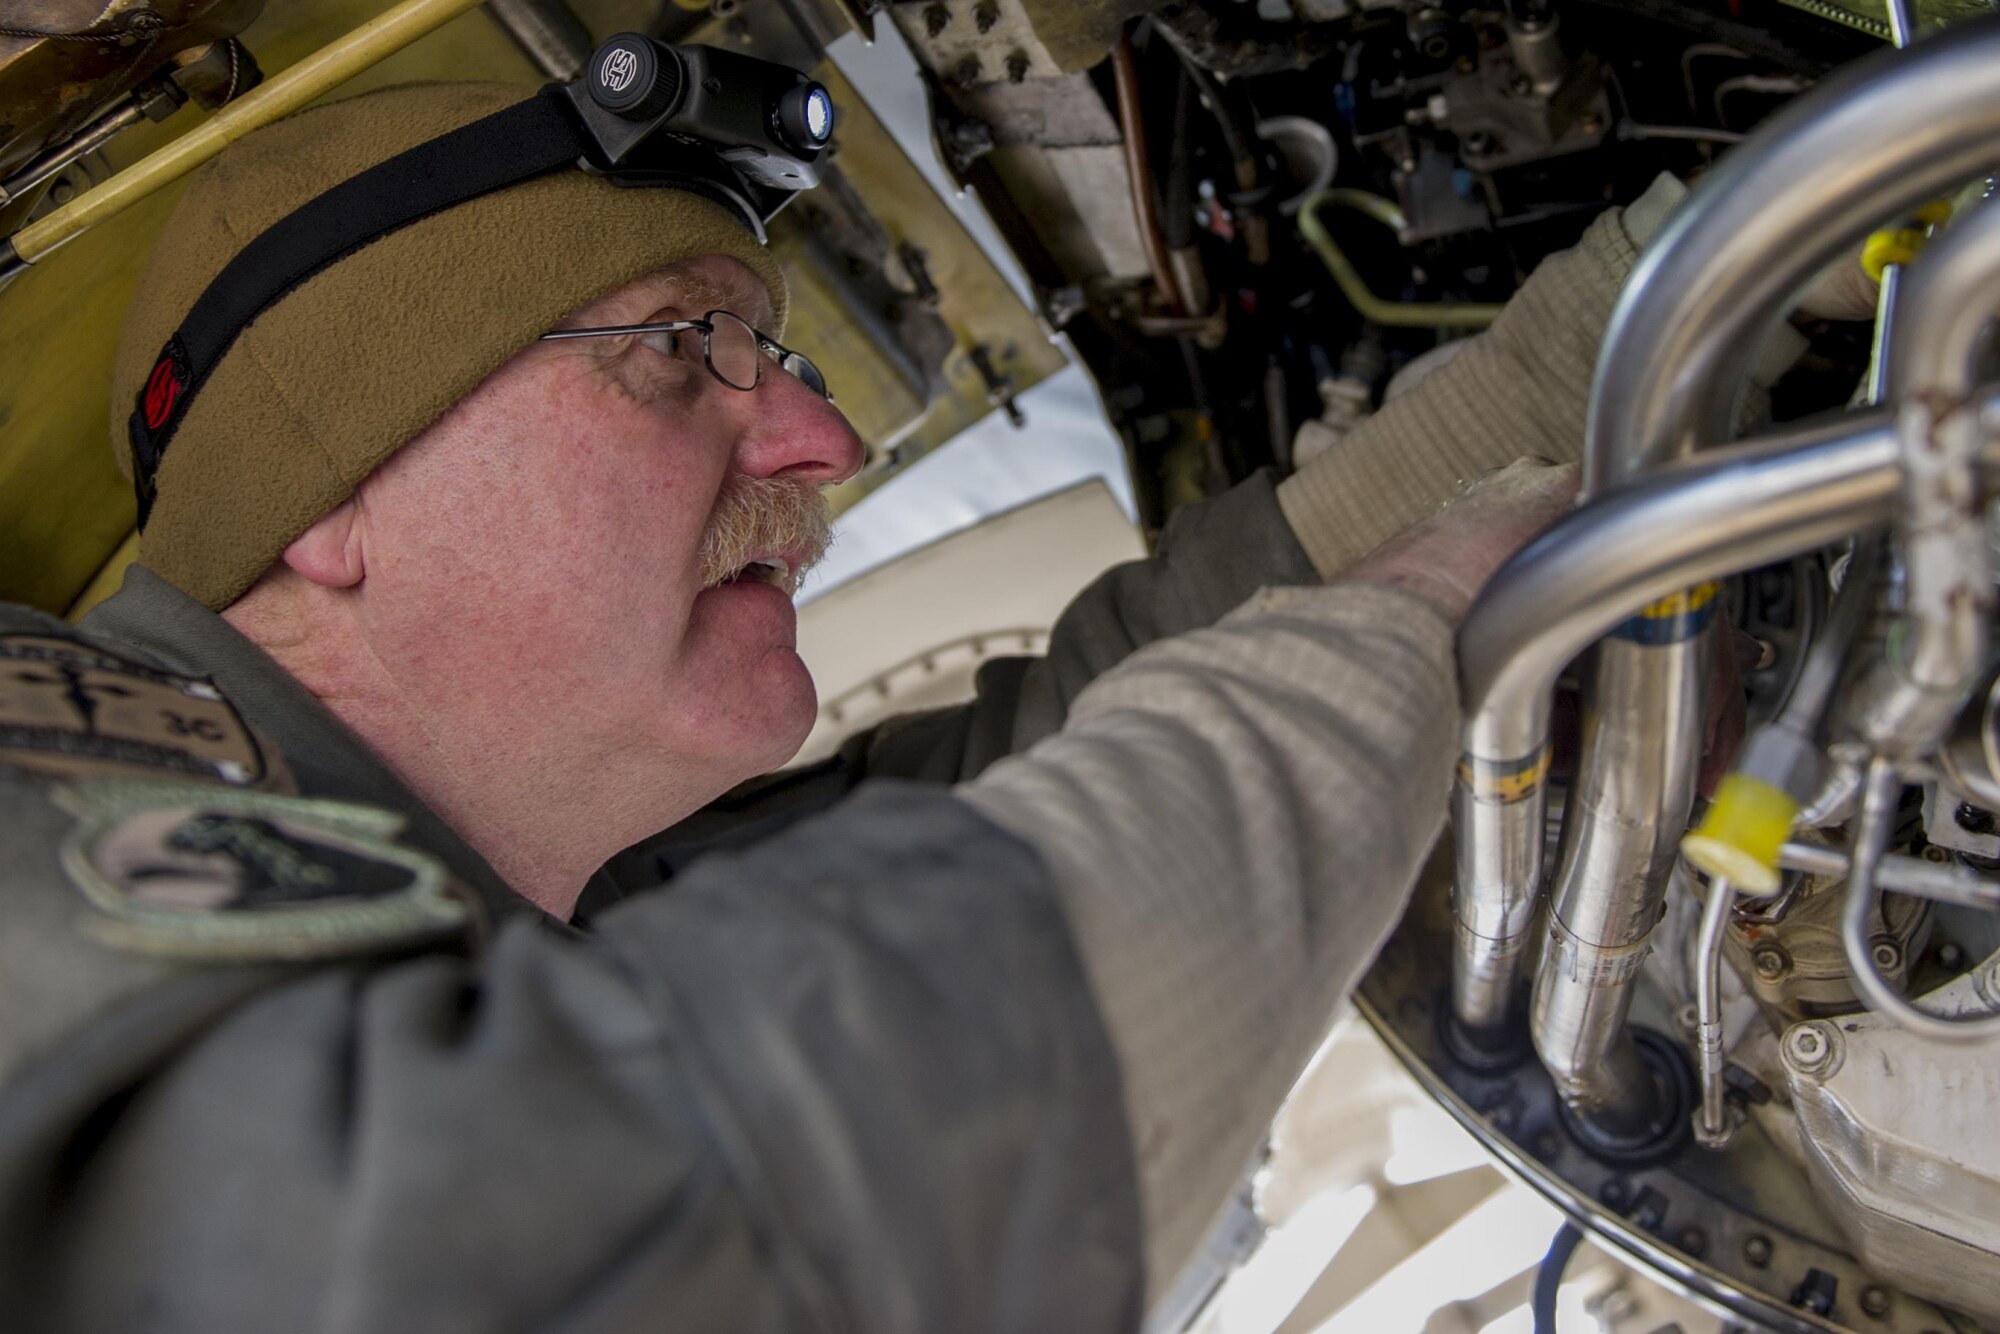 Master Sgt. Jim Anderson, 455th Expeditionary Aircraft Maintenance Squadron, deployed from Hill Air Force Base, Utah, removes and replaces a jet fuel starter on an F-16 Fighting Falcon at Bagram Airfield, Afghanistan, Jan. 8, 2016. The 455th EAMXS provides combat-ready aircraft to the air component commander in support of coalition forces throughout Afghanistan. (U.S. Air Force photo/Tech. Sgt. Robert Cloys)